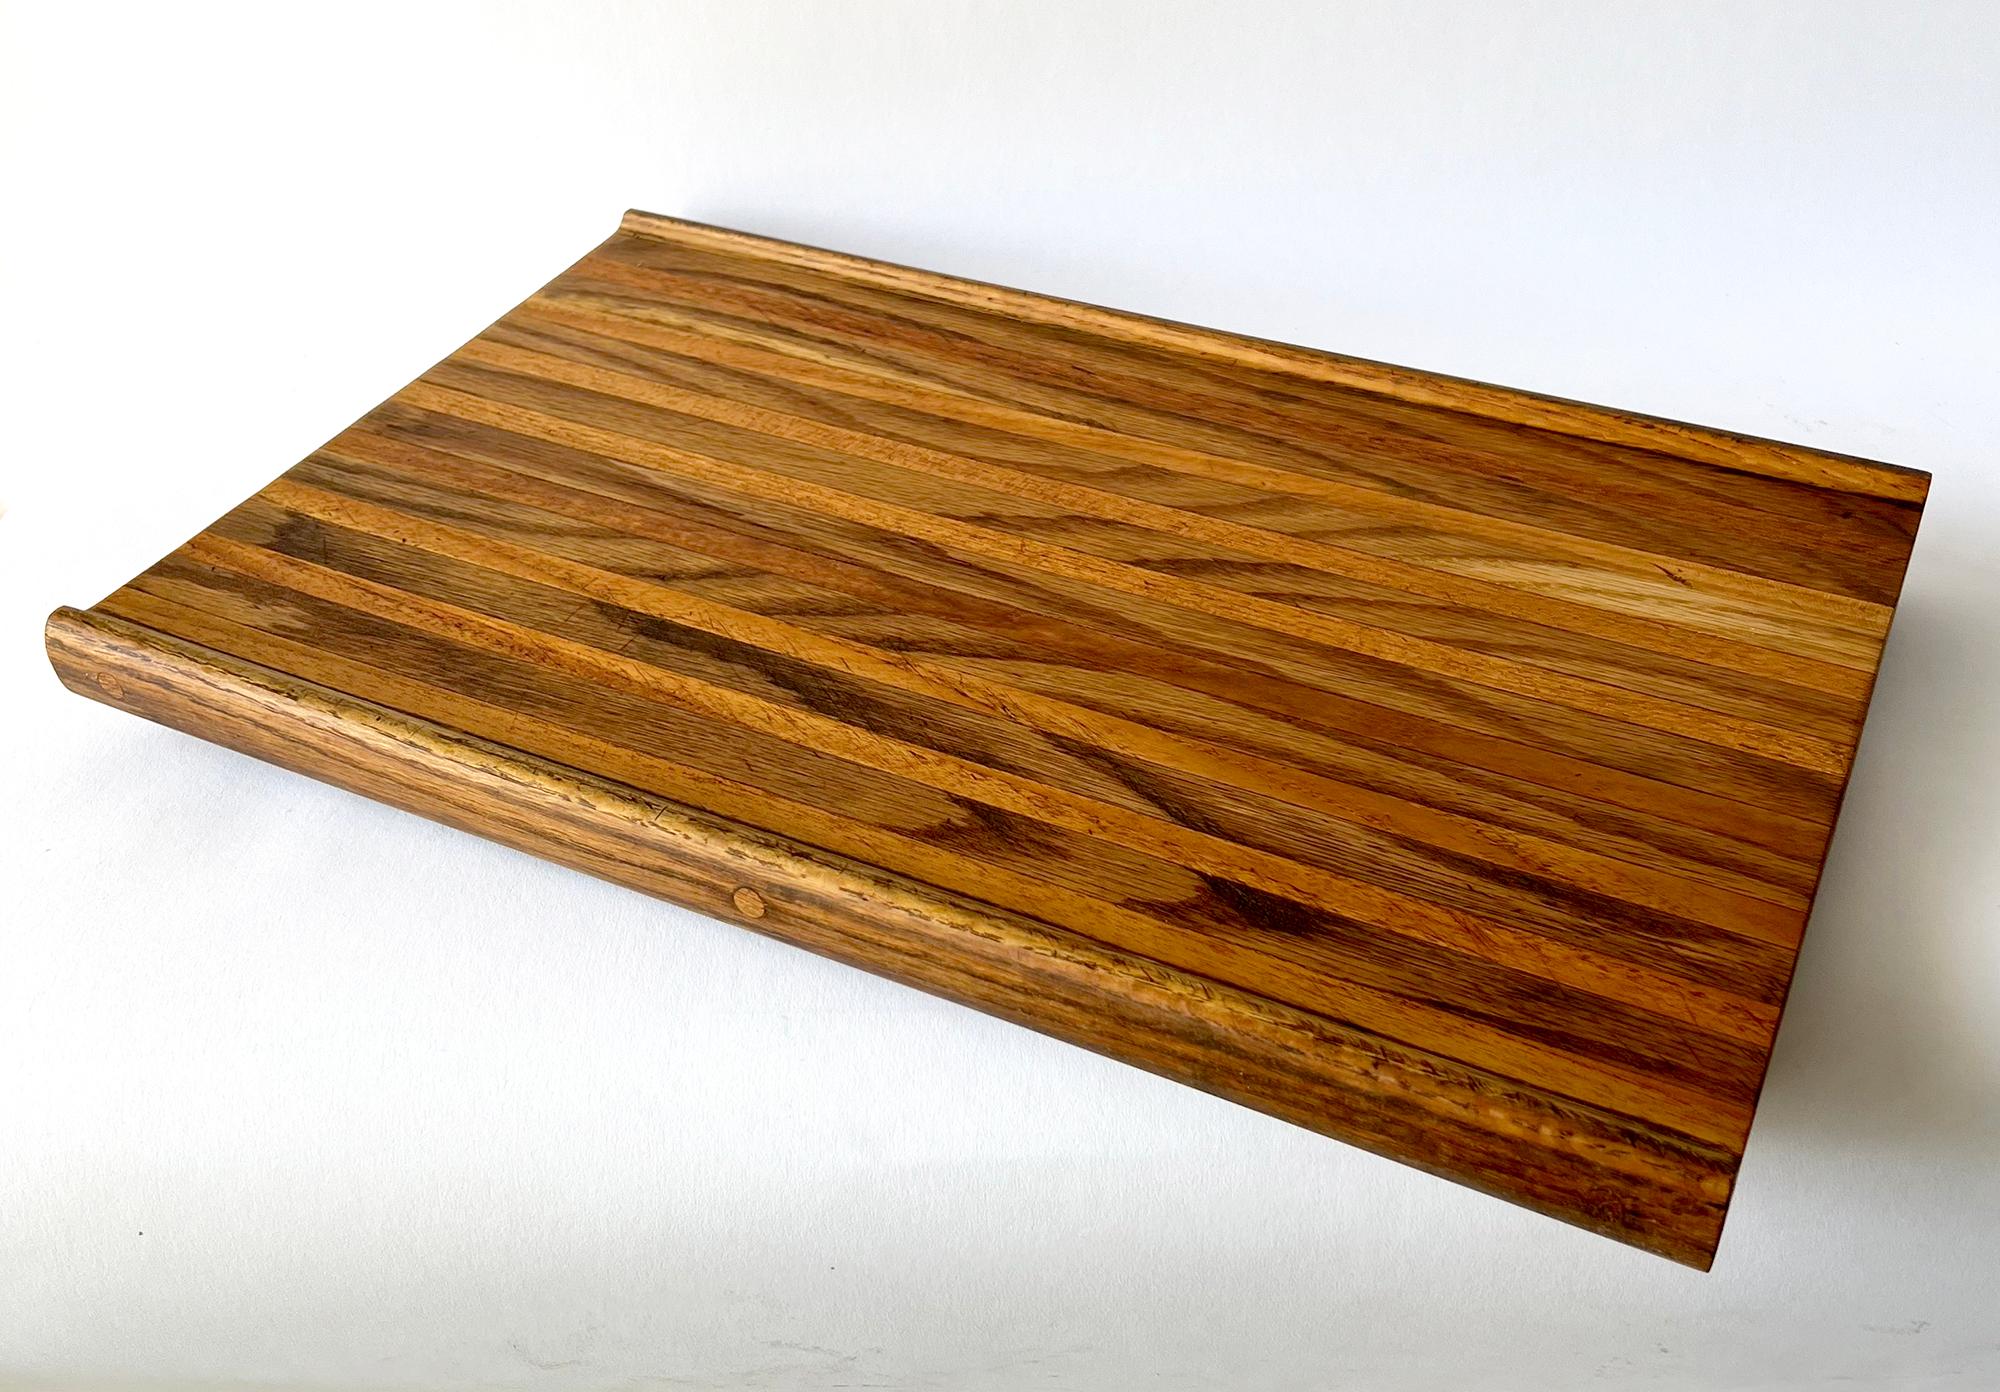 Inlaid wood cutting board created by woodworker and jeweler Robert Trout of San Diego, California. Board measures 2